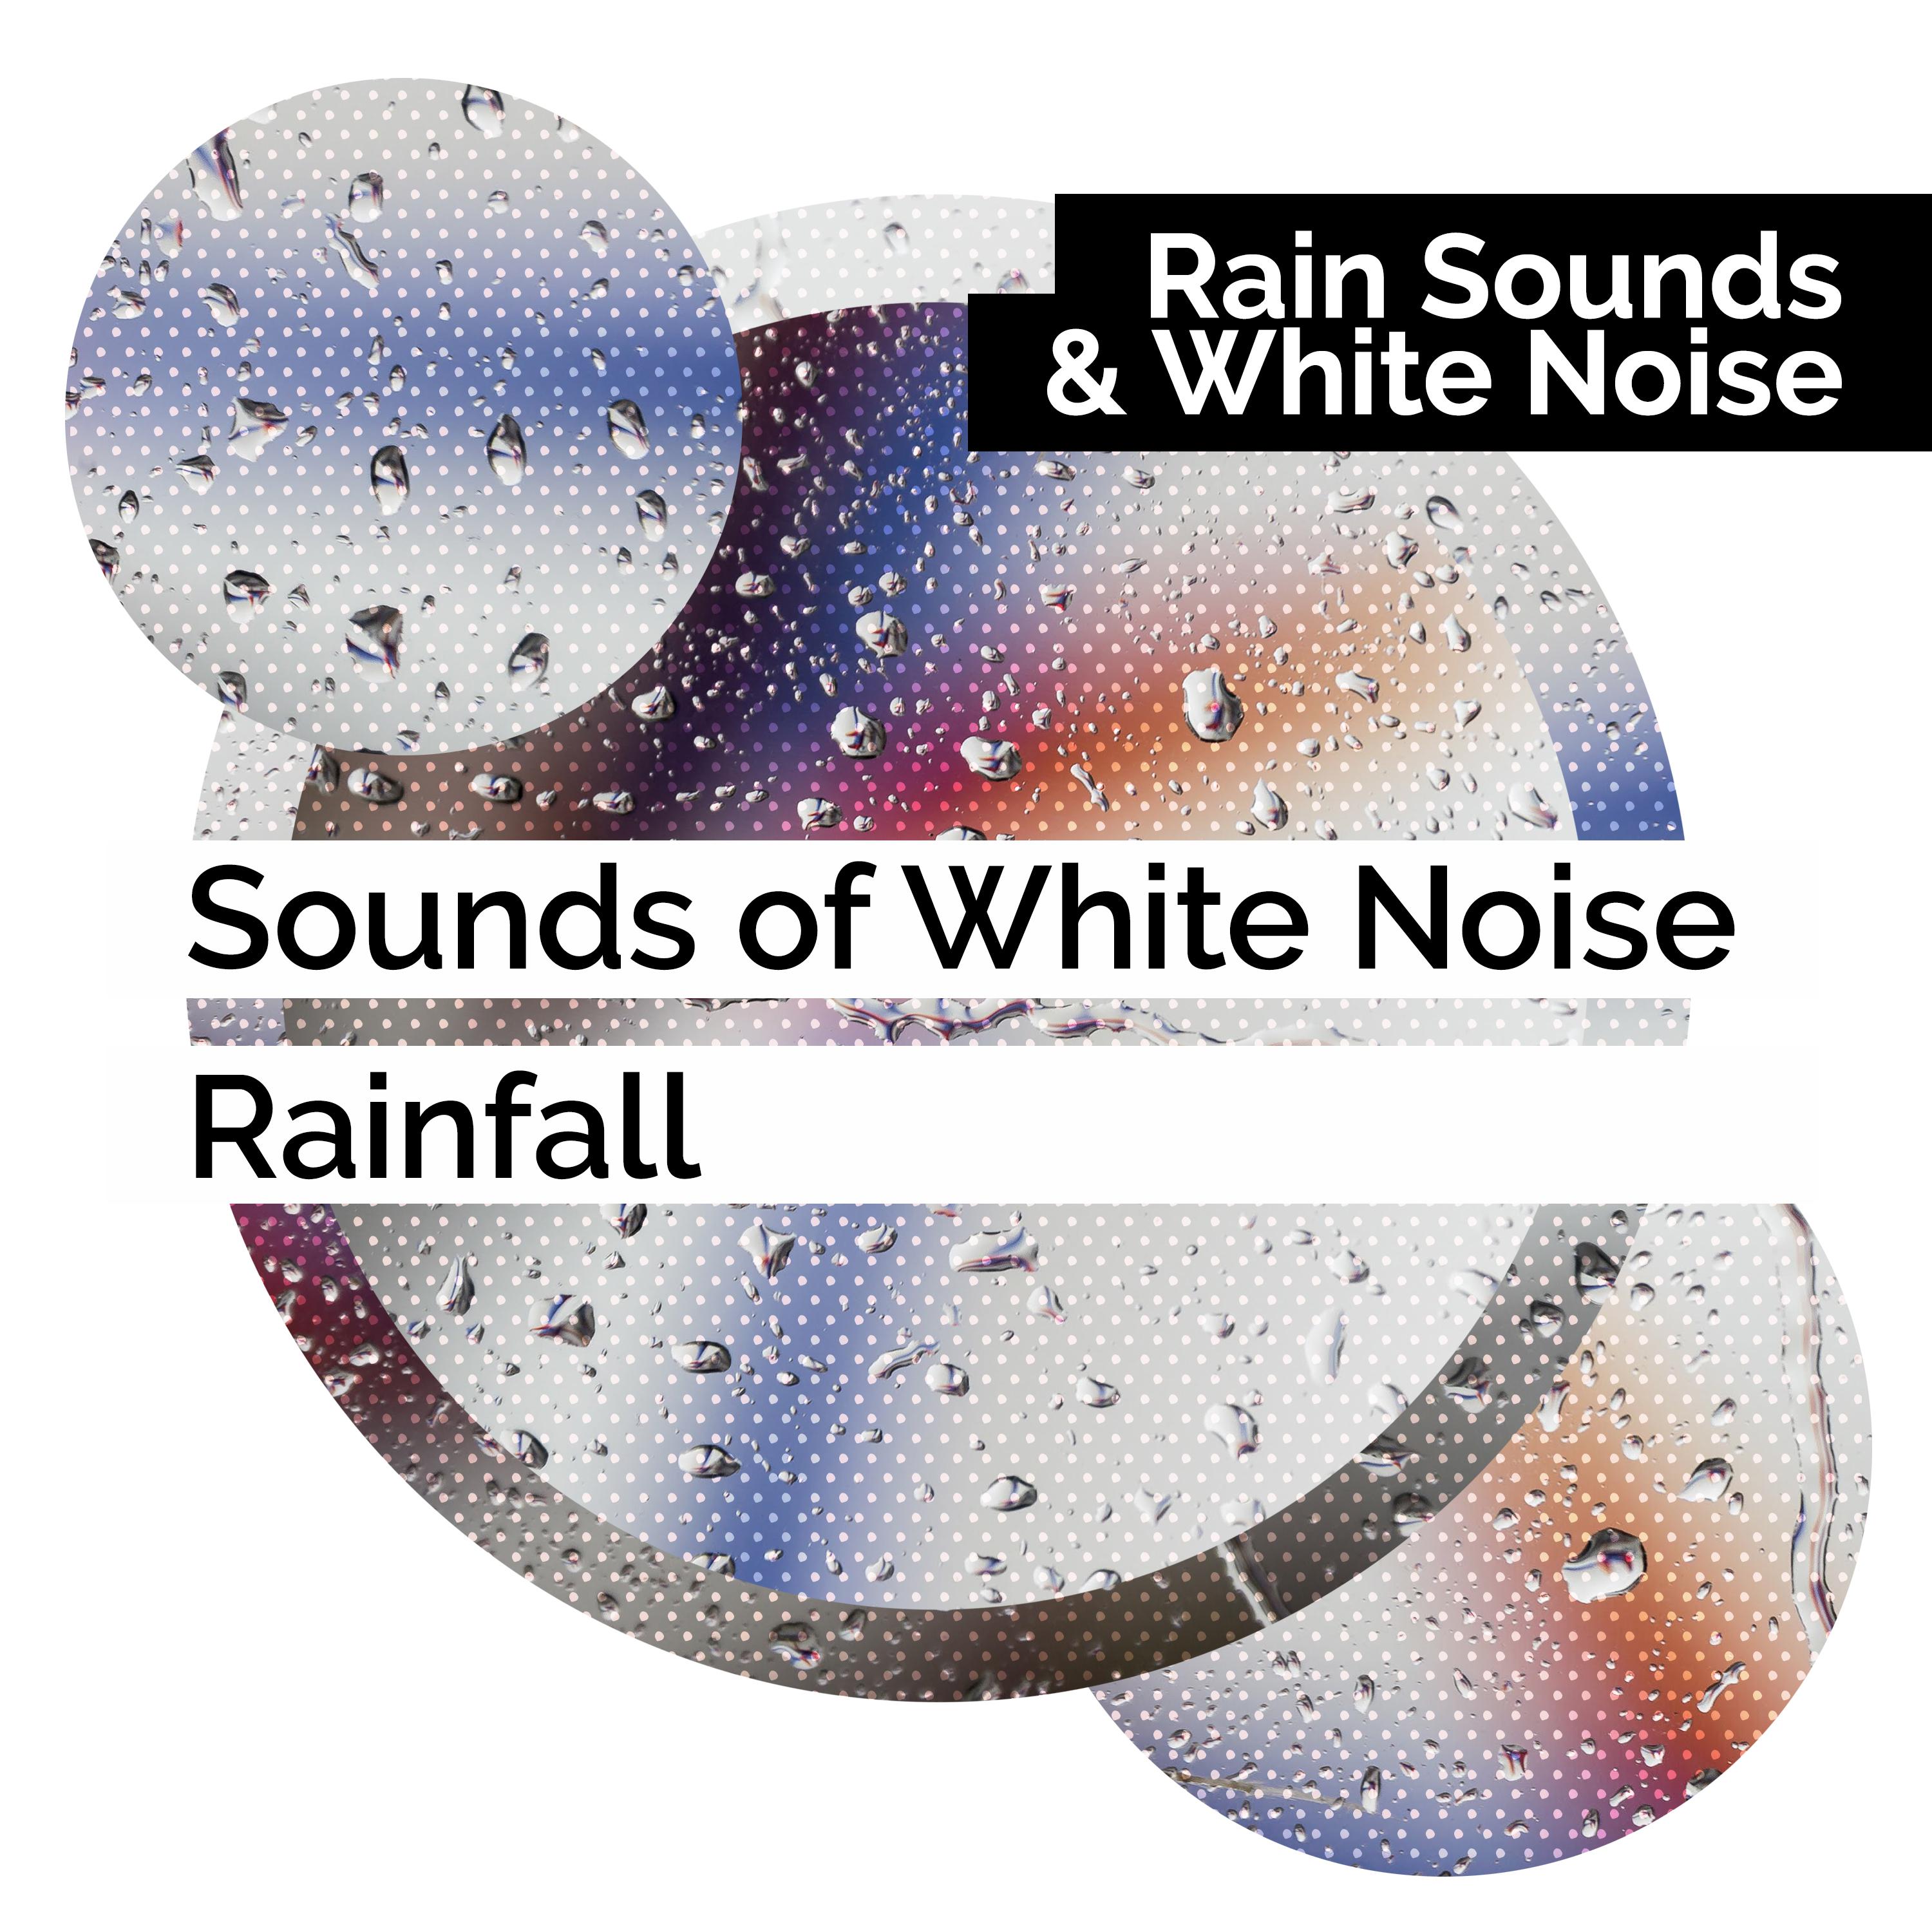 Sounds of White Noise Rainfall